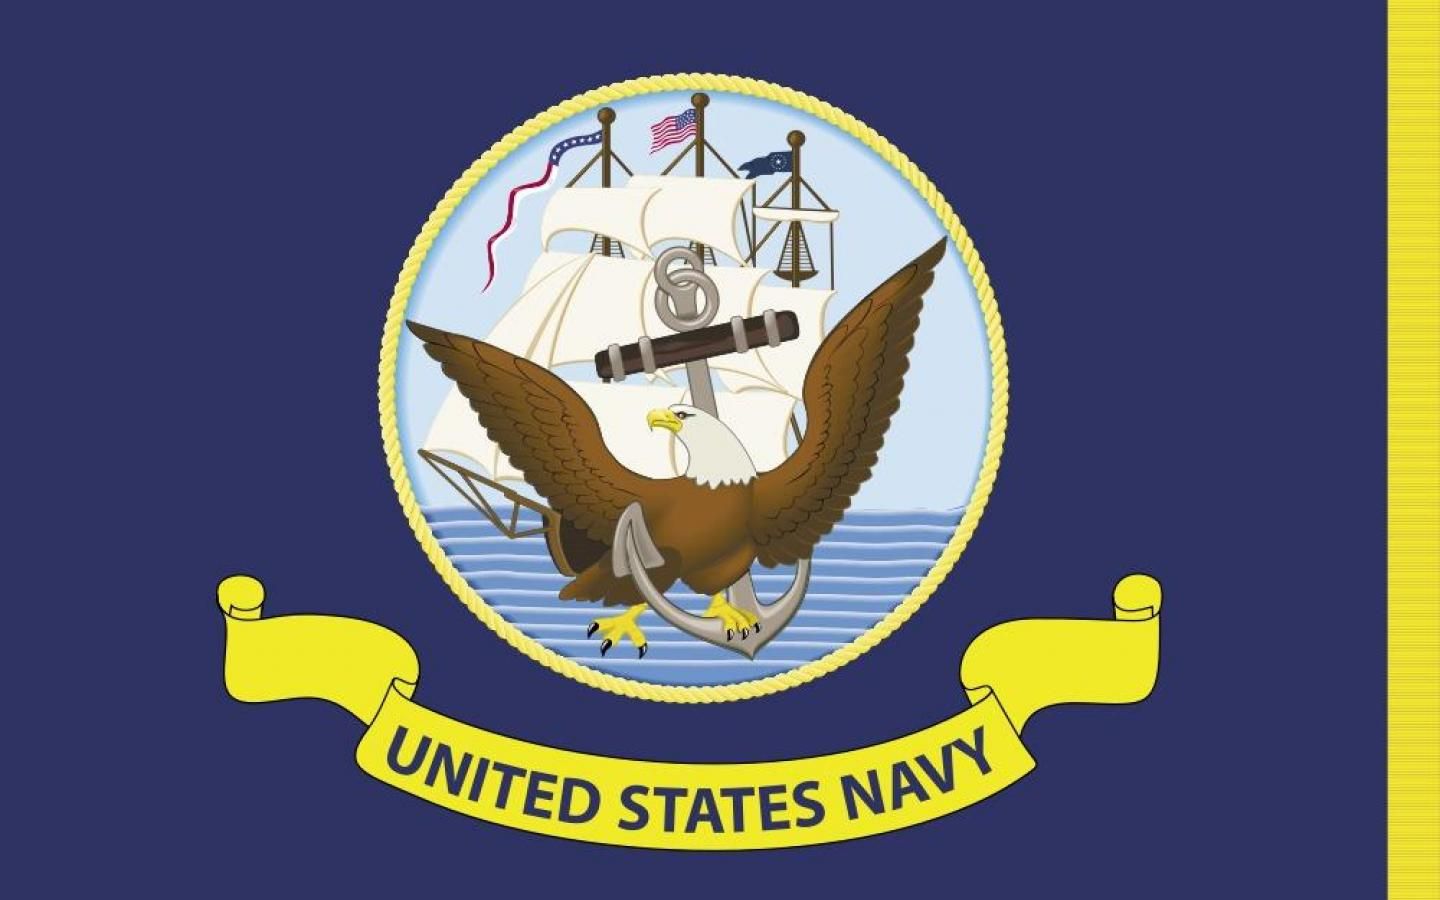 UNITED STATES NAVY FLAG WALLPAPER - (#70270) - HD Wallpapers ...